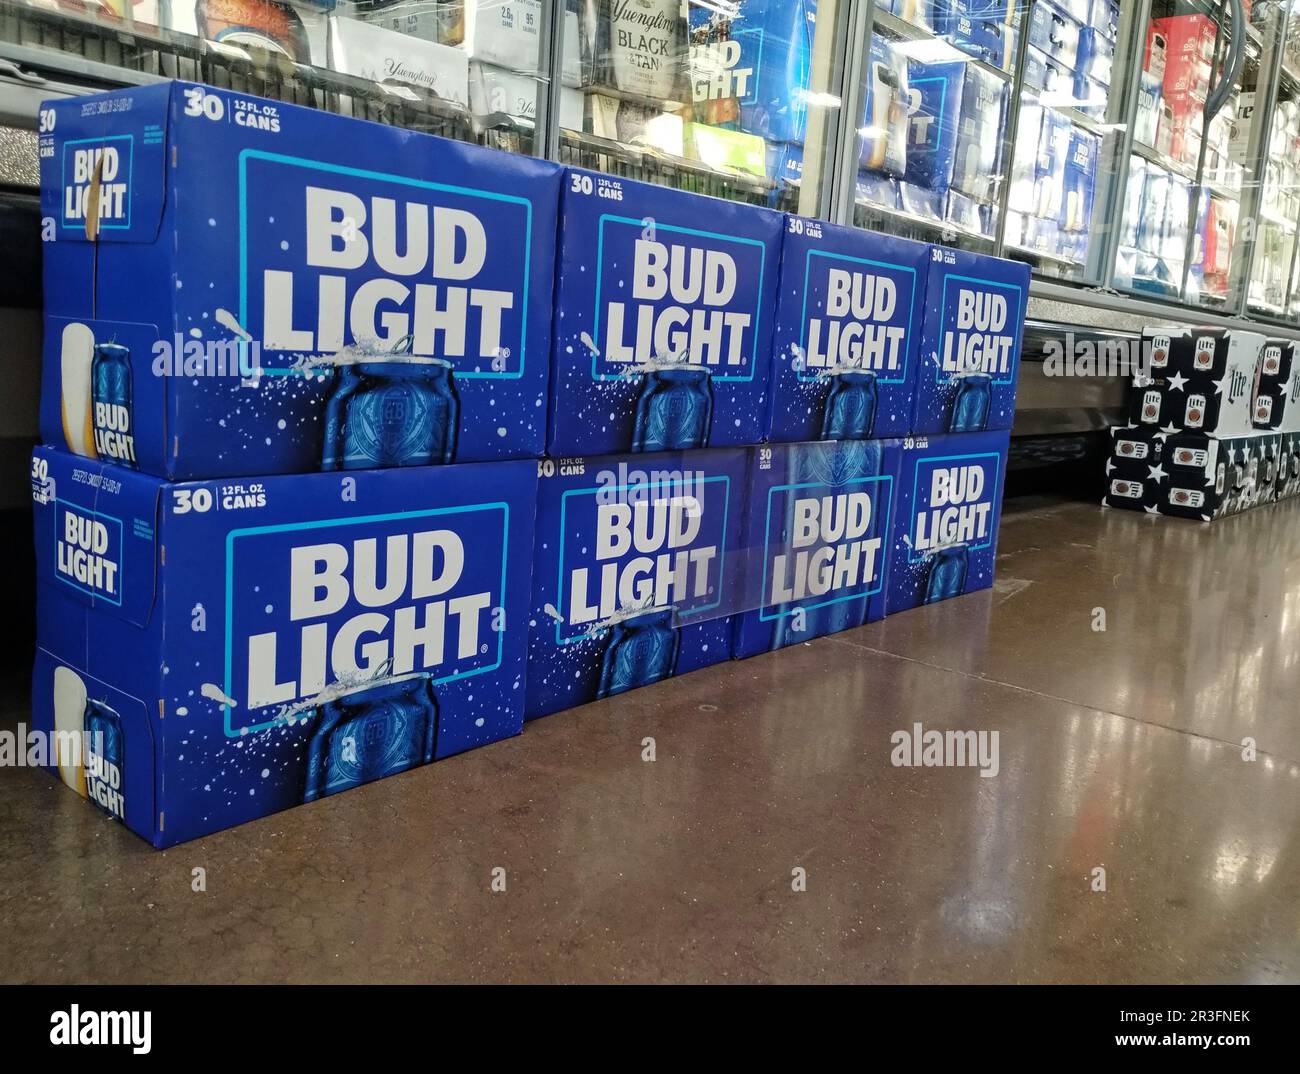 Cases of Bud Light beer line the beer aisle at a Kroger grocery store on Tuesday, May 23, 2023 in Owensboro, Daviess County, KY, USA. In the run up to the Memorial Day holiday weekend in the United States, Bud Light sales show no sign of recovery from the April backlash created by a promotional partnership with transgender social media influencer Dylan Mulvaney, with year-over-year sales down 28.4 percent in the week ended May 13, according to NielsenIQ point-of-sale scan data reported by the Beer Business Daily industry trade publication. (Apex MediaWire Photo by Billy Suratt) Stock Photo